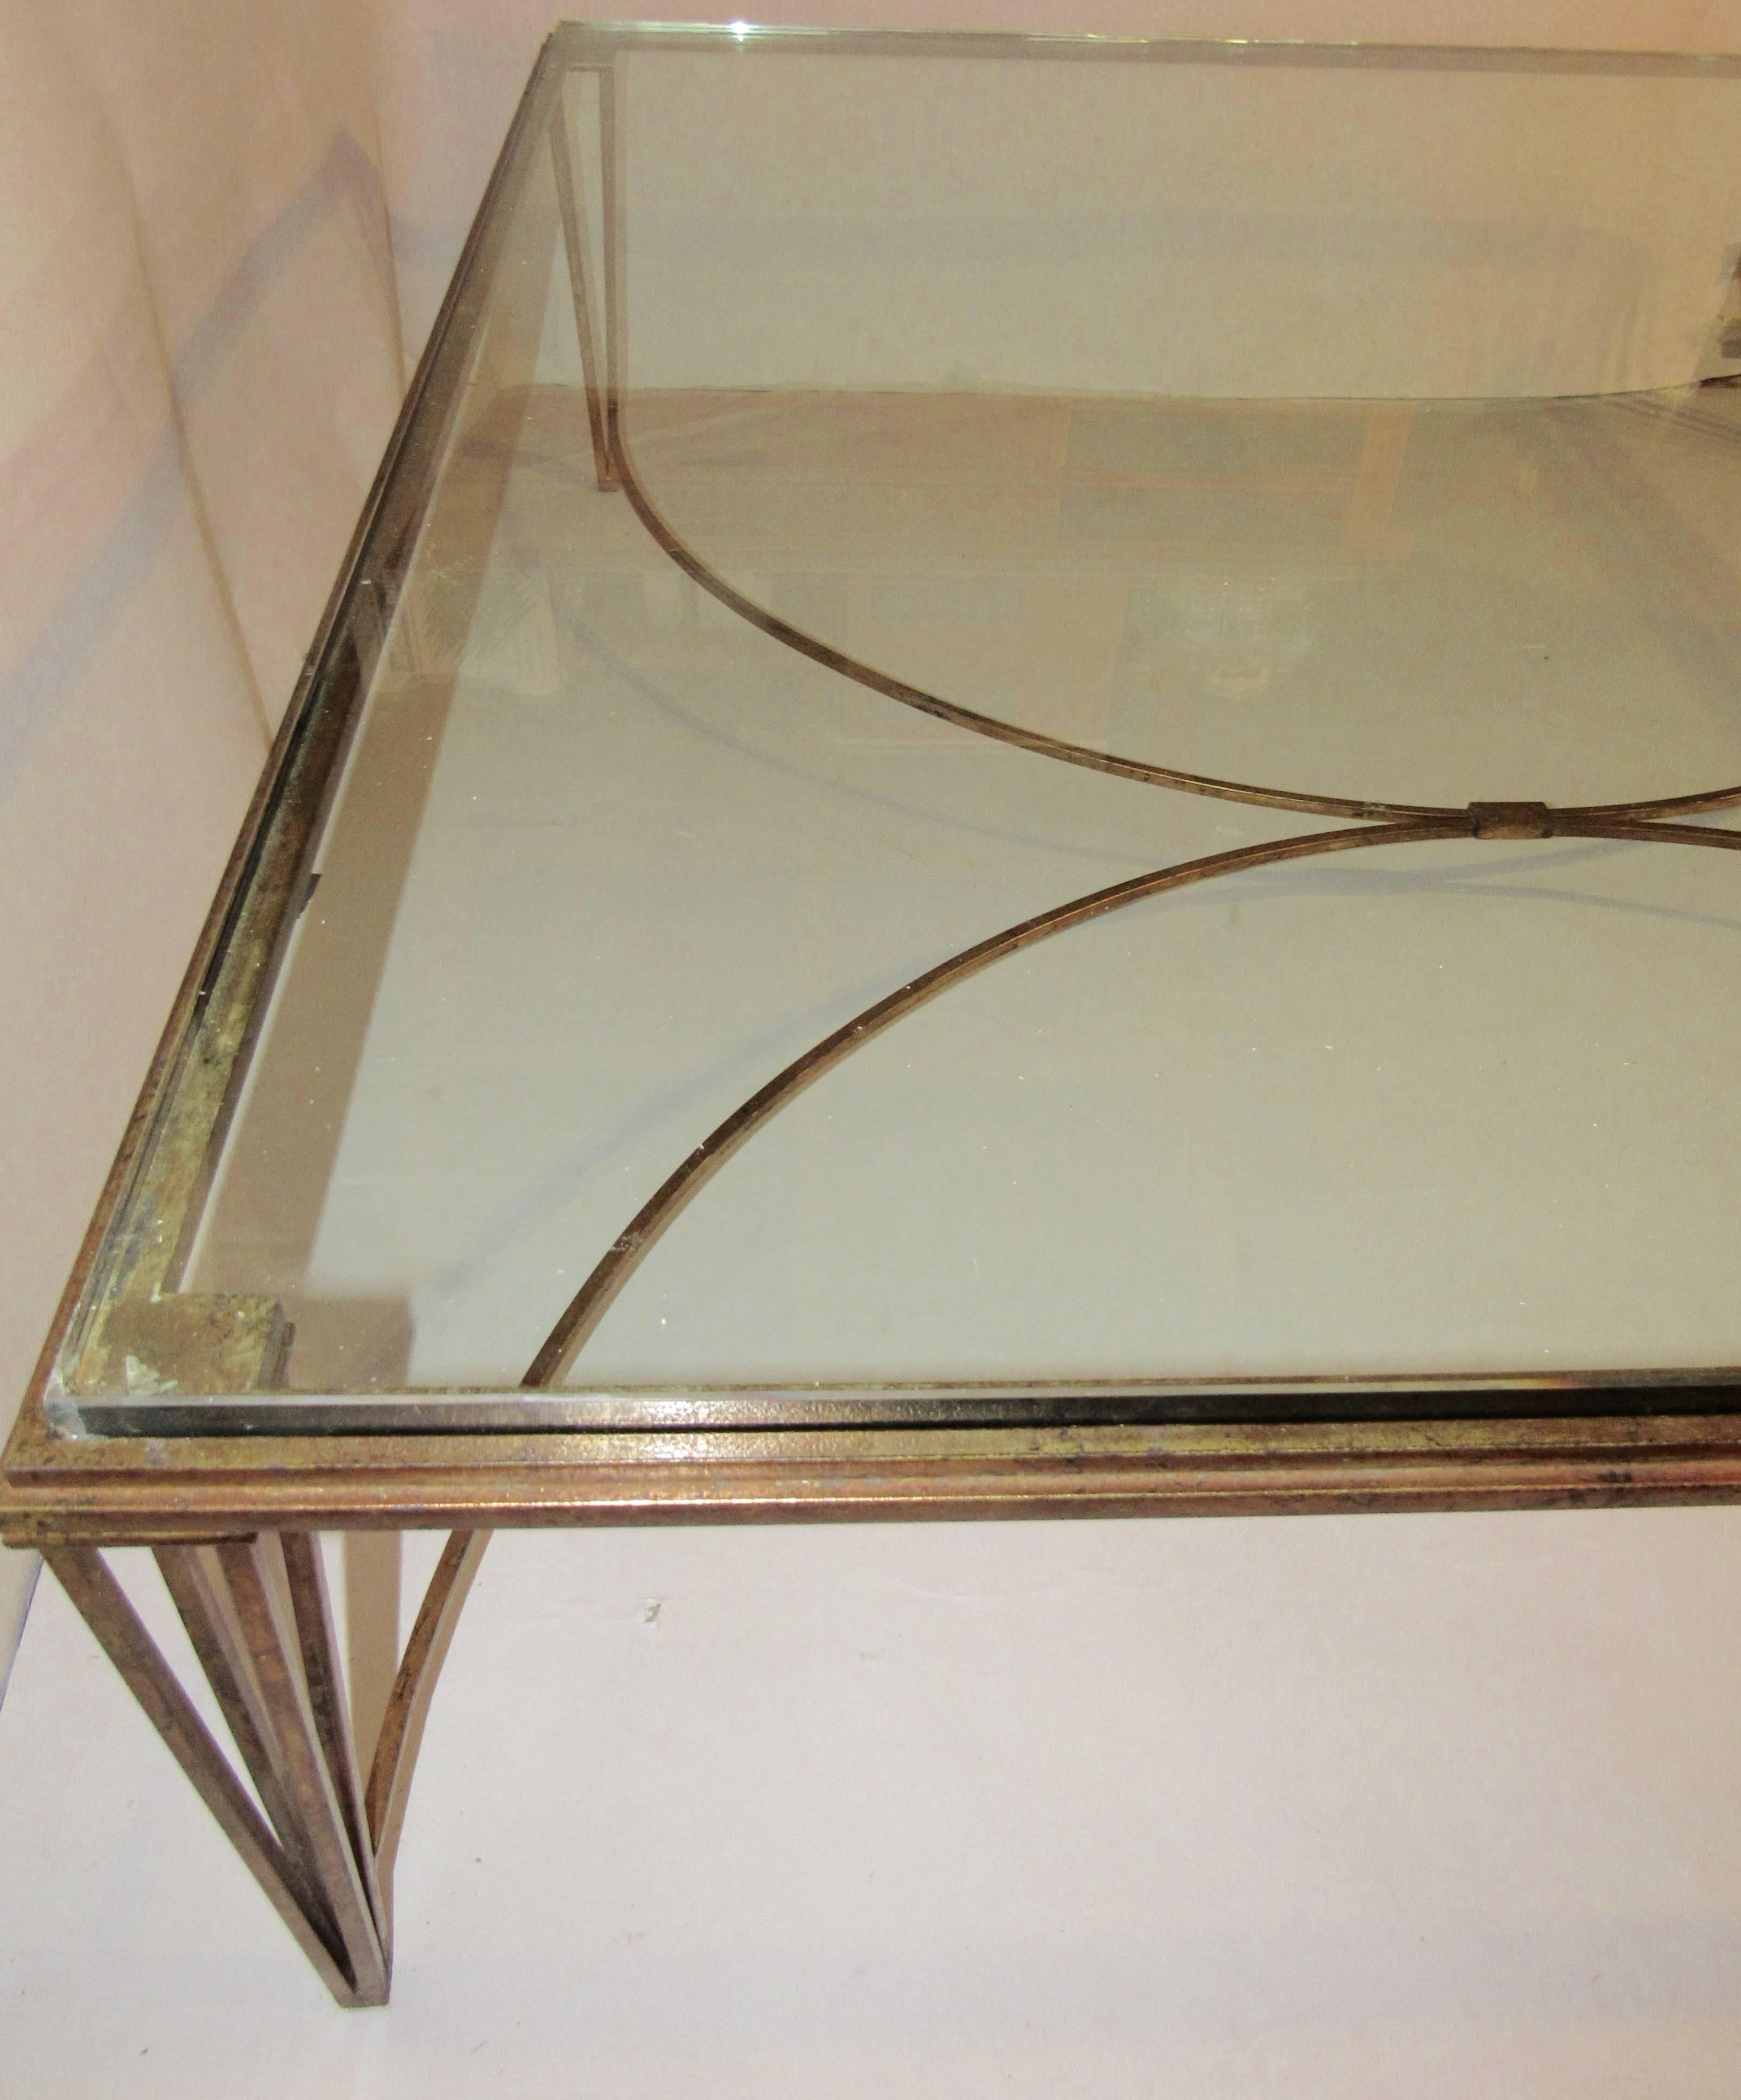 Classic elegant French gilt iron coffee table with a 3/4 inch thick  glass inset top. The frame is in excellent vintage condition. We have filled chips in the vintage glass but are happy to order a new piece if you desire.